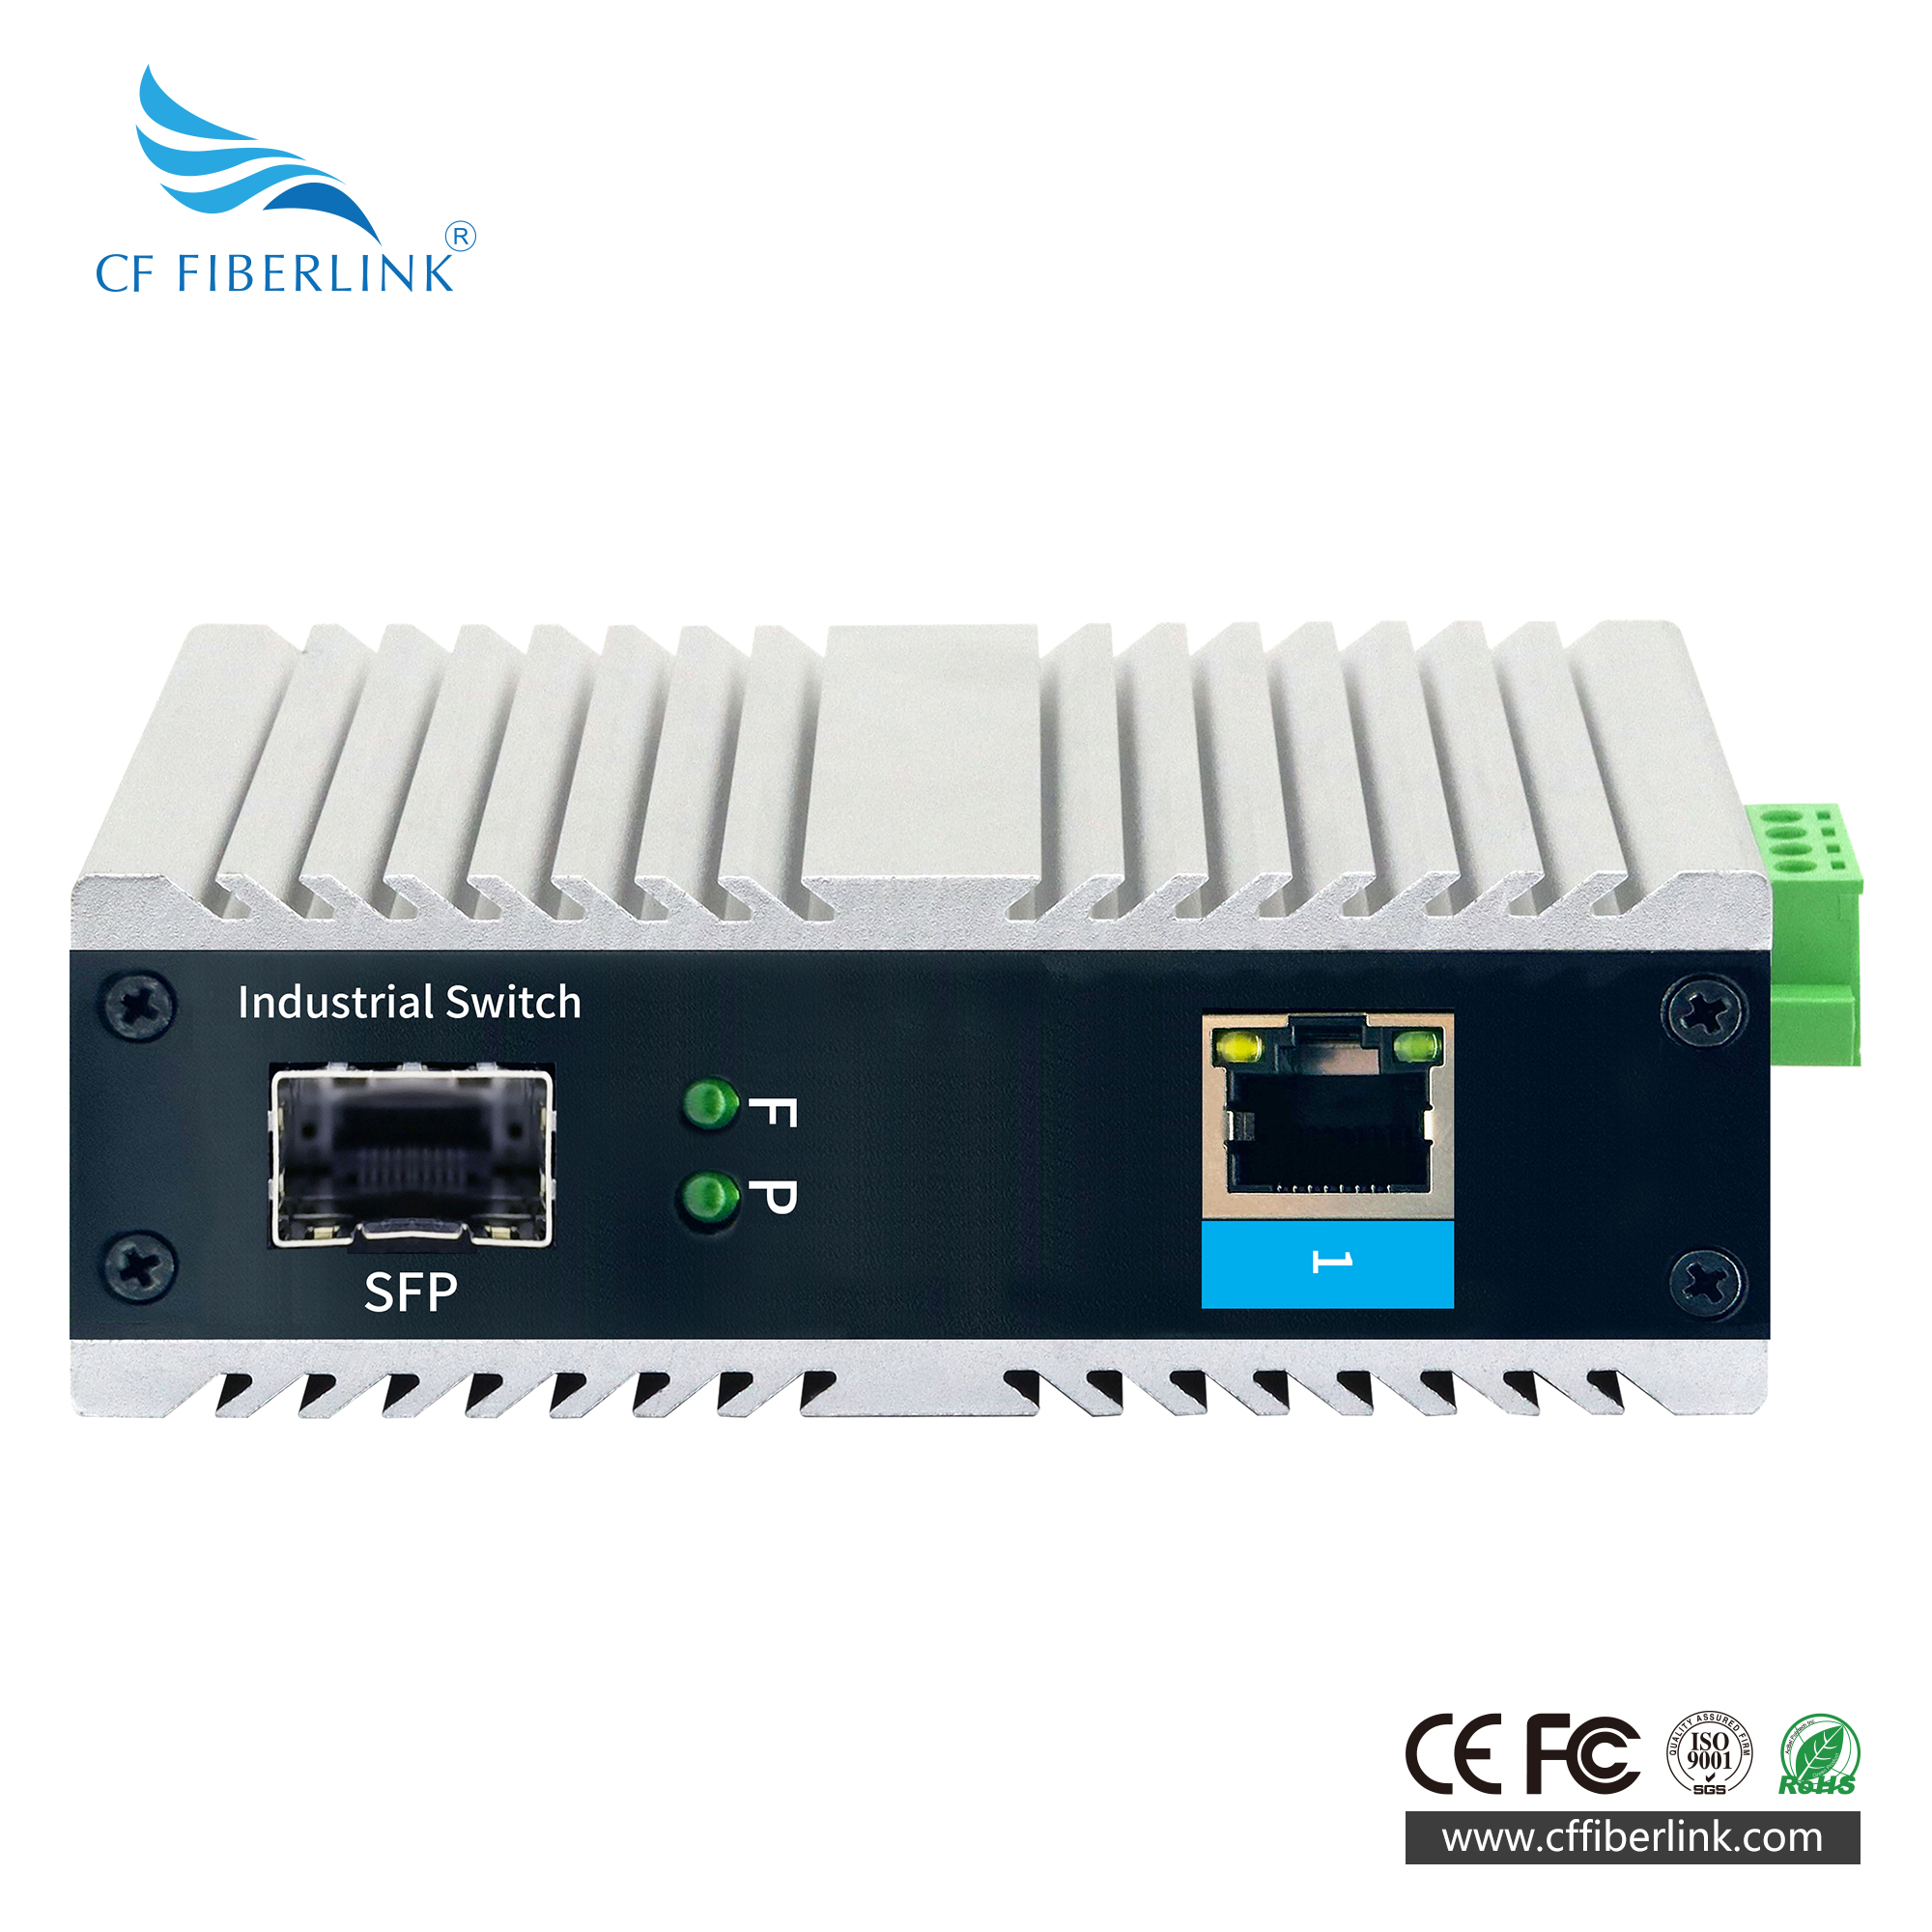 2-port 10/100M/1000M Industrial Ethernet Switch